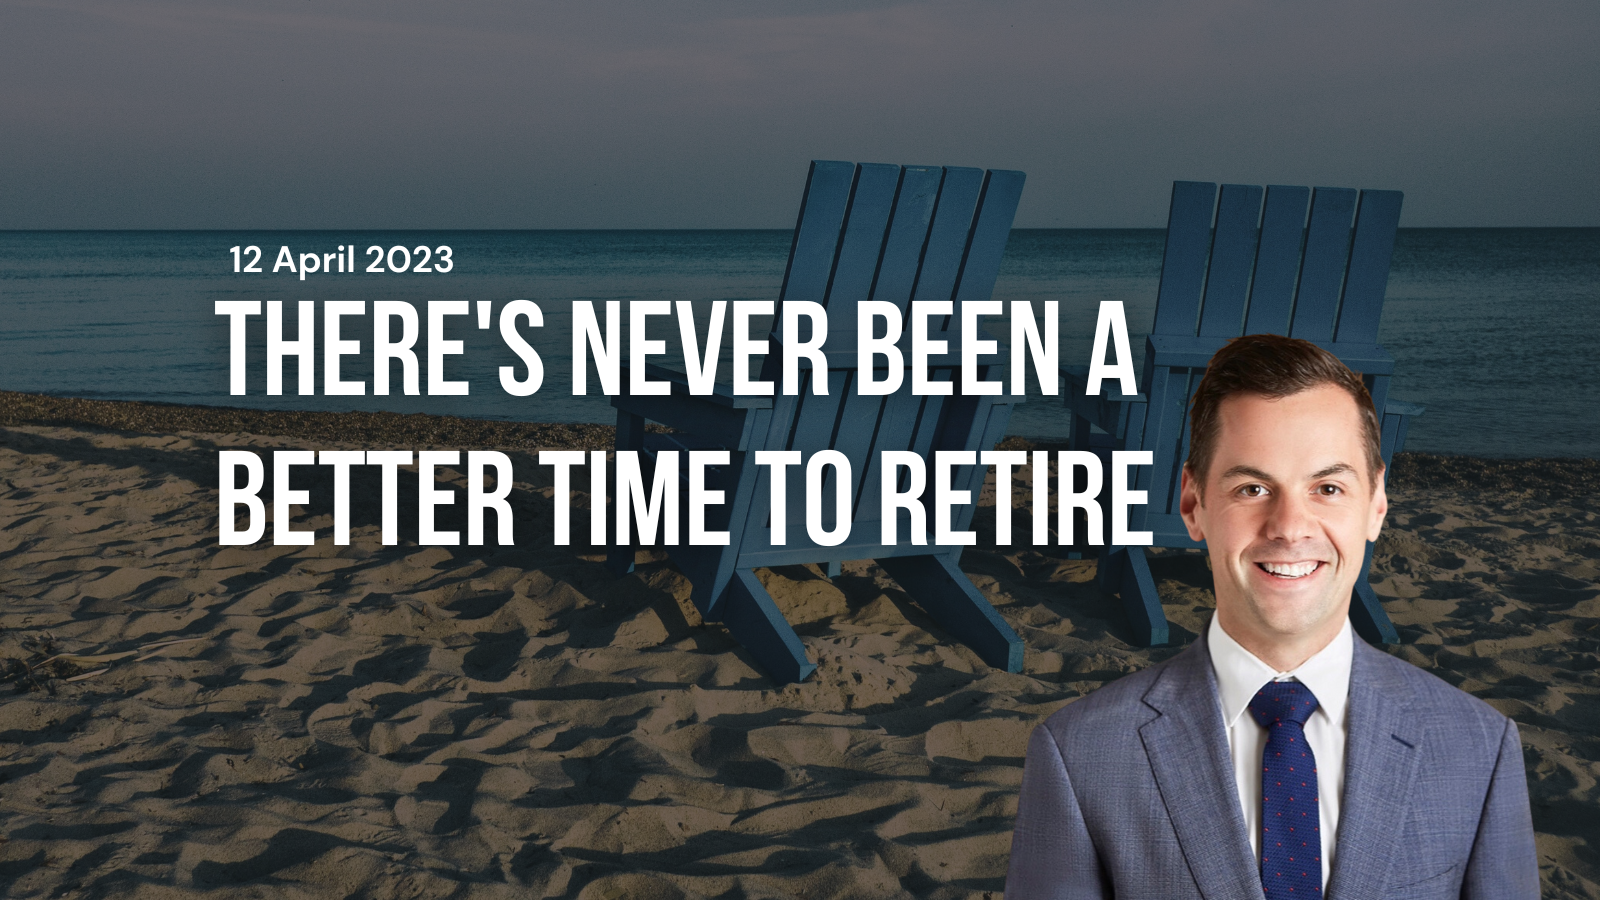 Theres never been a better time to retire